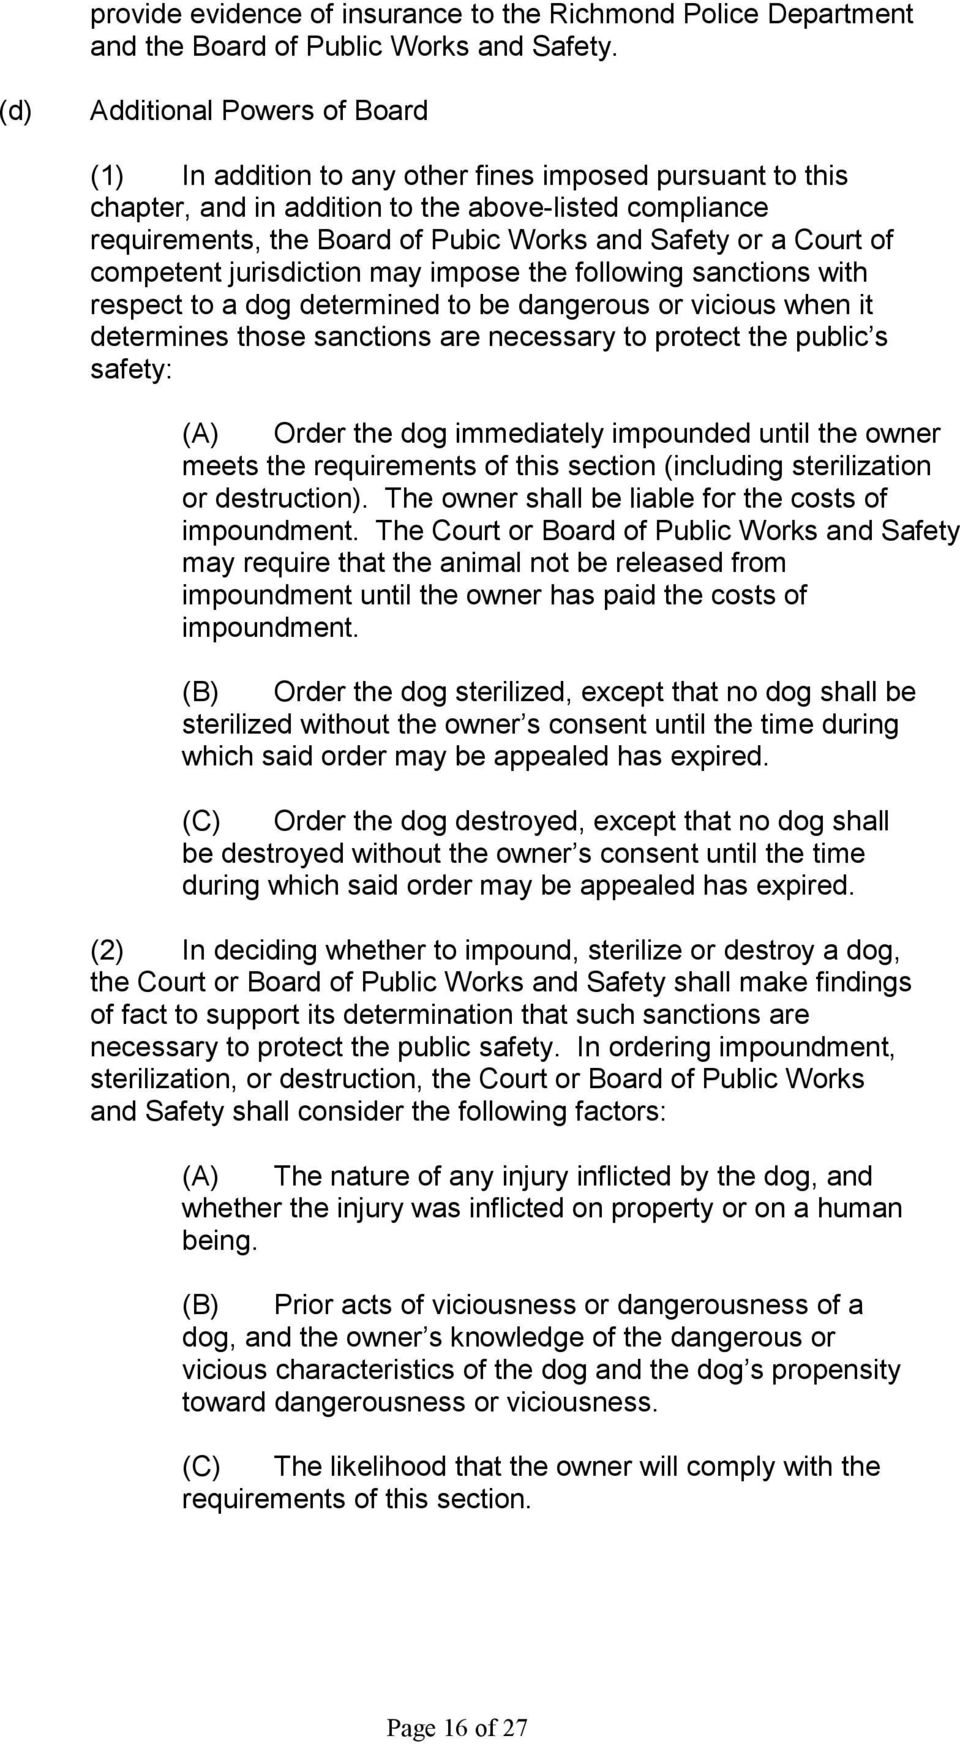 a Court of competent jurisdiction may impose the following sanctions with respect to a dog determined to be dangerous or vicious when it determines those sanctions are necessary to protect the public